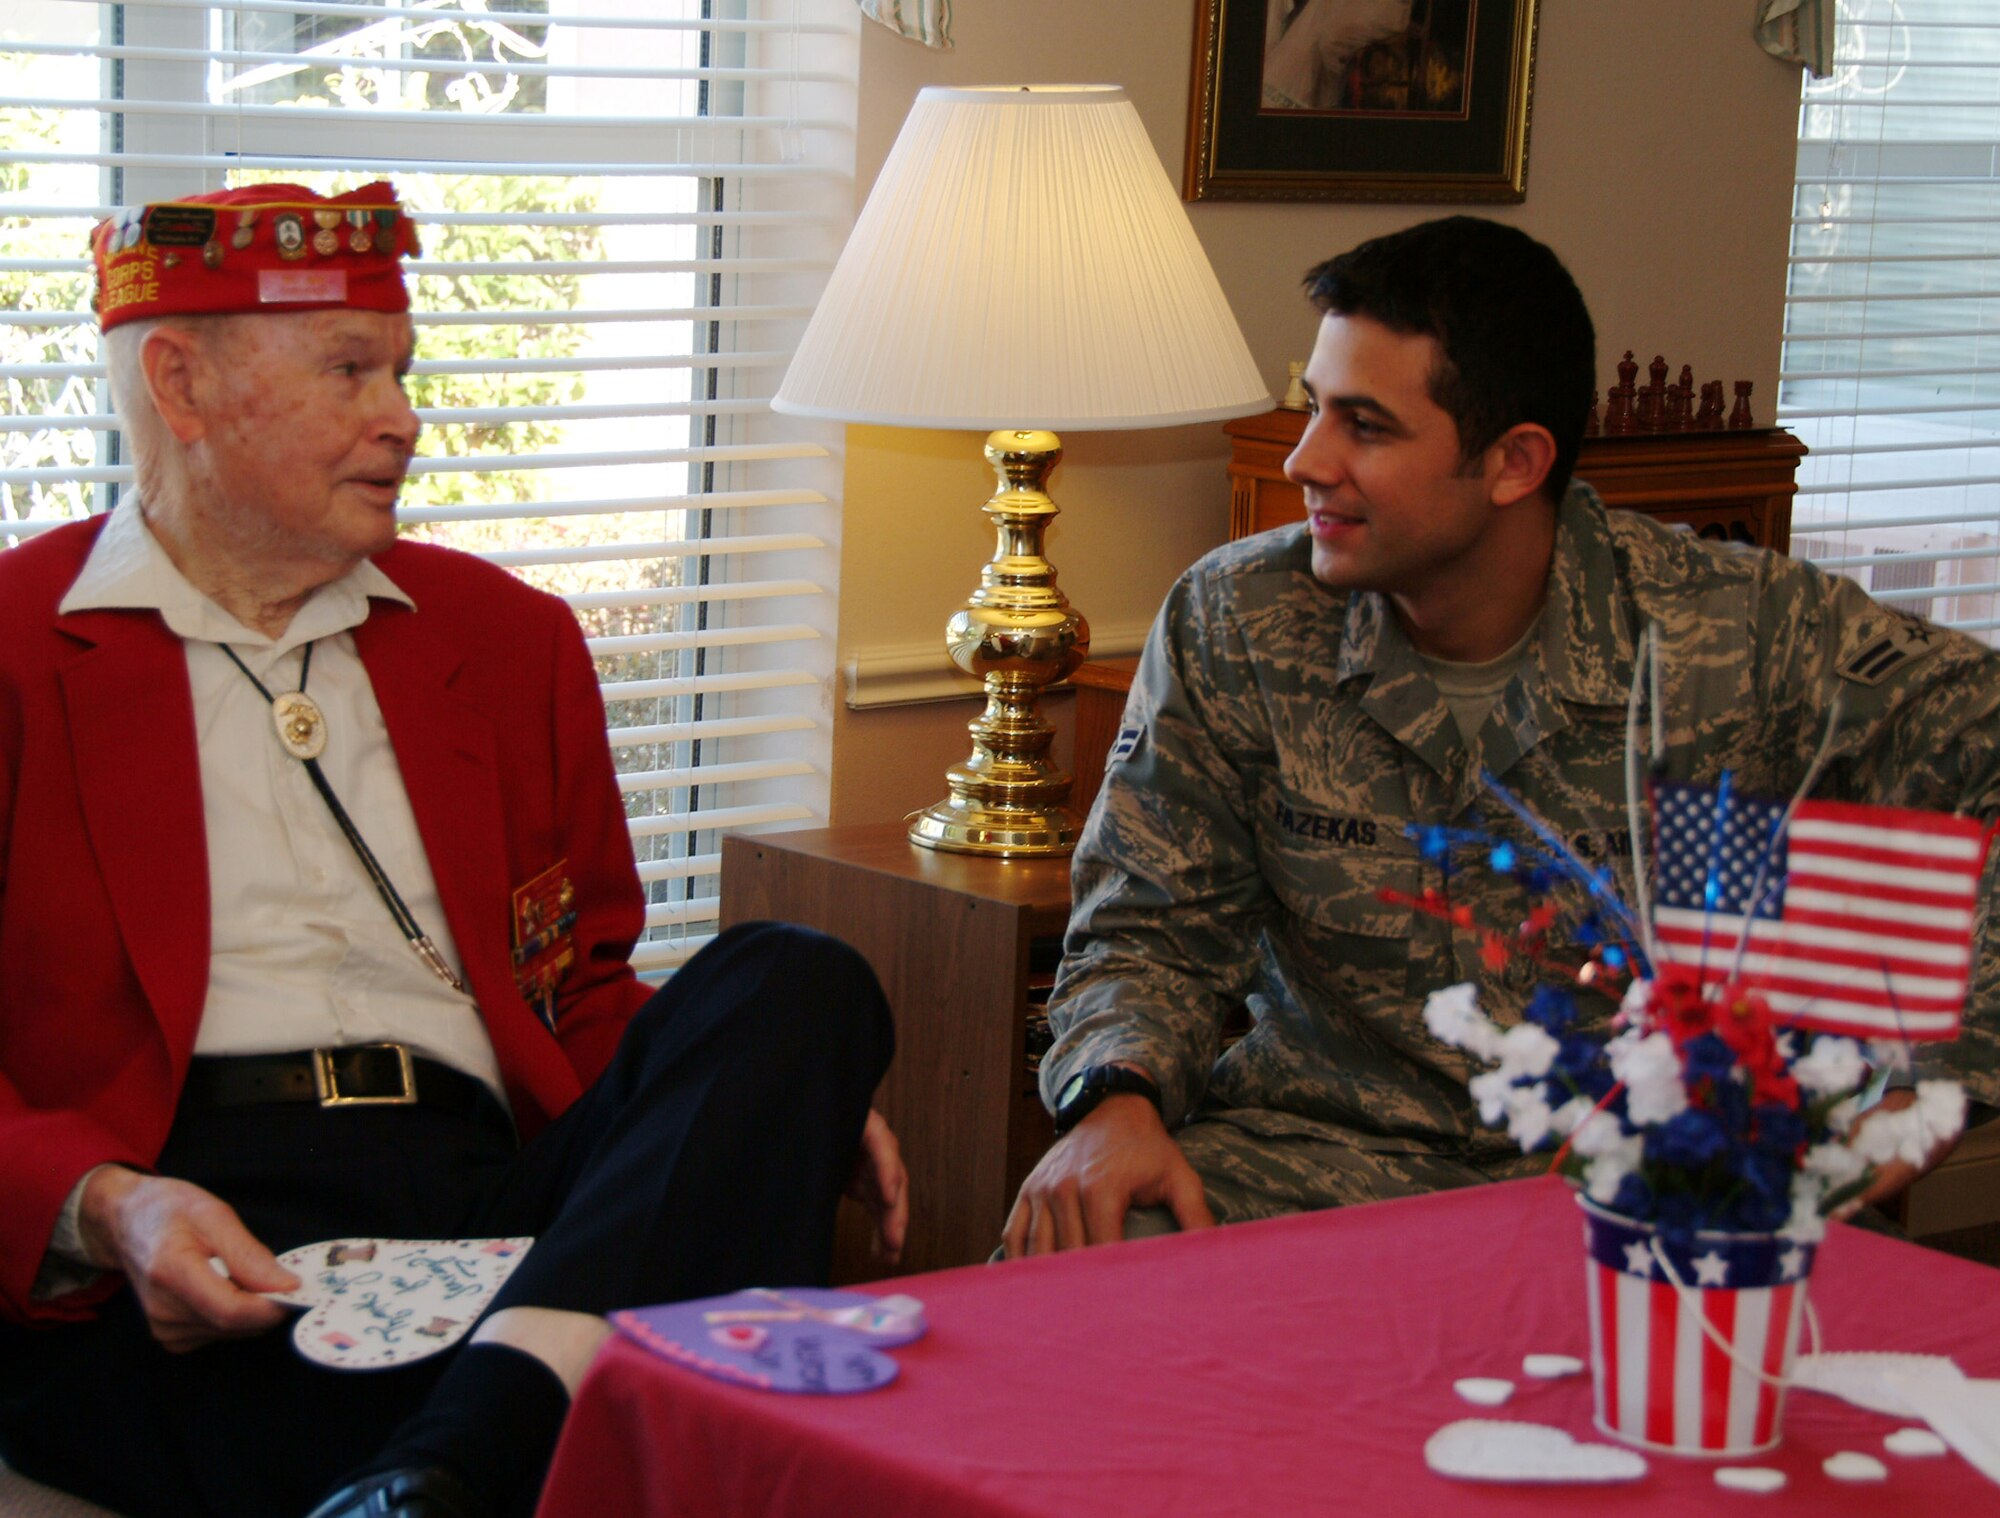 Airman 1st Class Michael Fazekas, 68th Electronic Warfare Squadron, visits with Marine and Air Force veteran Floyd Feb. 14 at the Sterling House in Niceville Fla.  More than 50 active duty 53d Wing members presented vets in nursing homes around the local area with cards and candy on Valentine's Day.  U.S. Air Force photo by Master Sgt. Andrew Leonhard.  